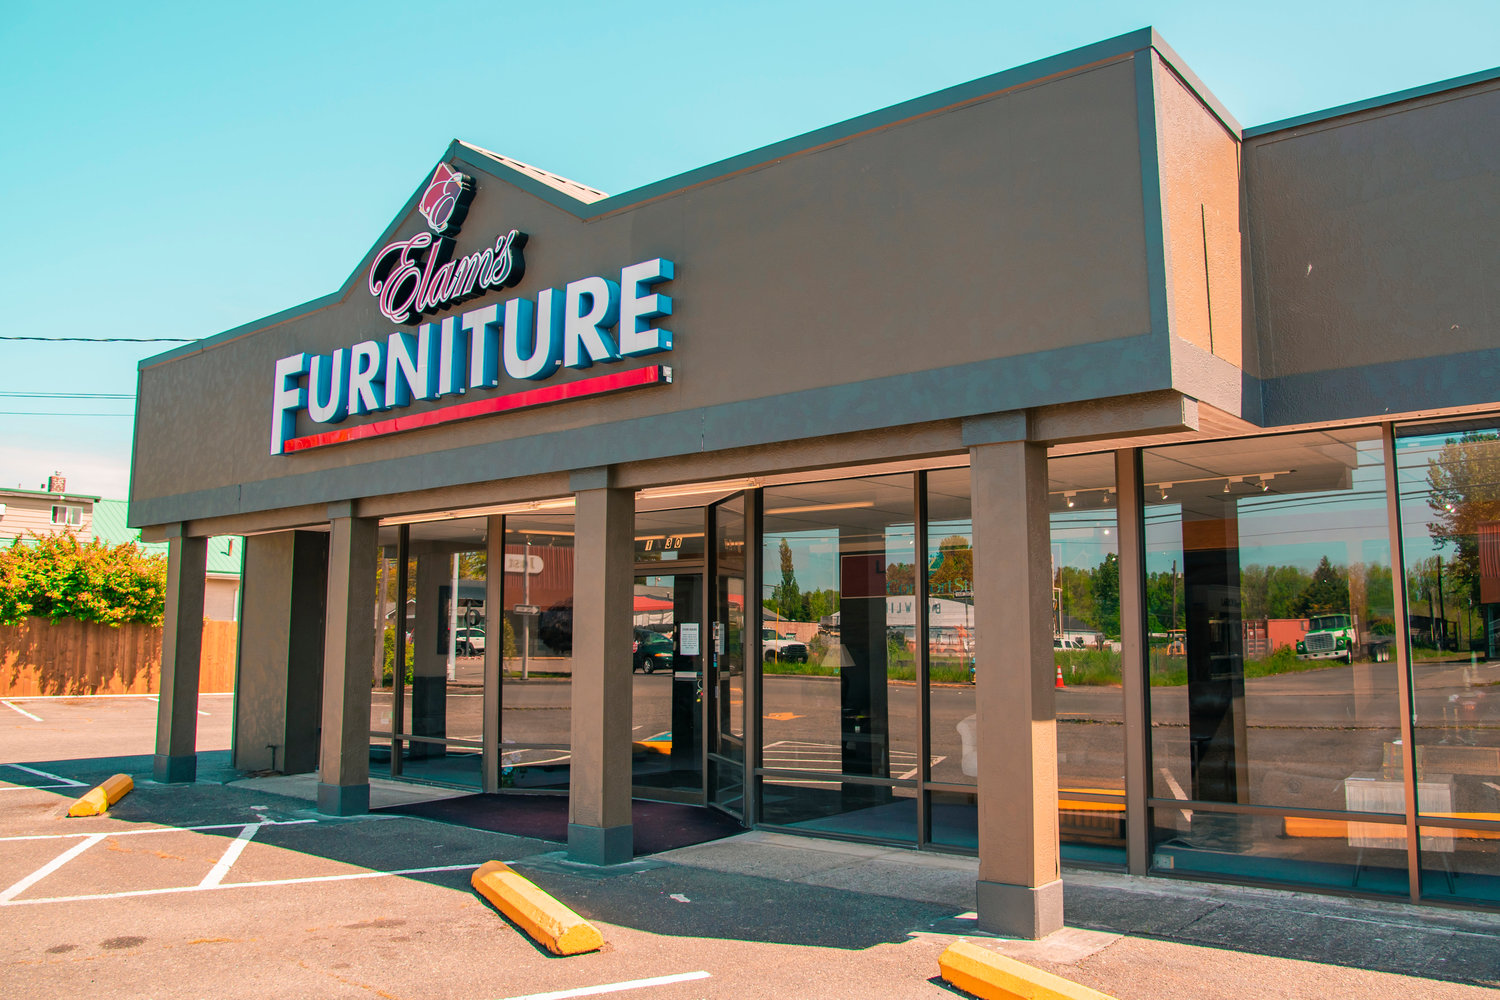 Elam’s Furniture is located at 1530 South Gold Street, in Centralia.